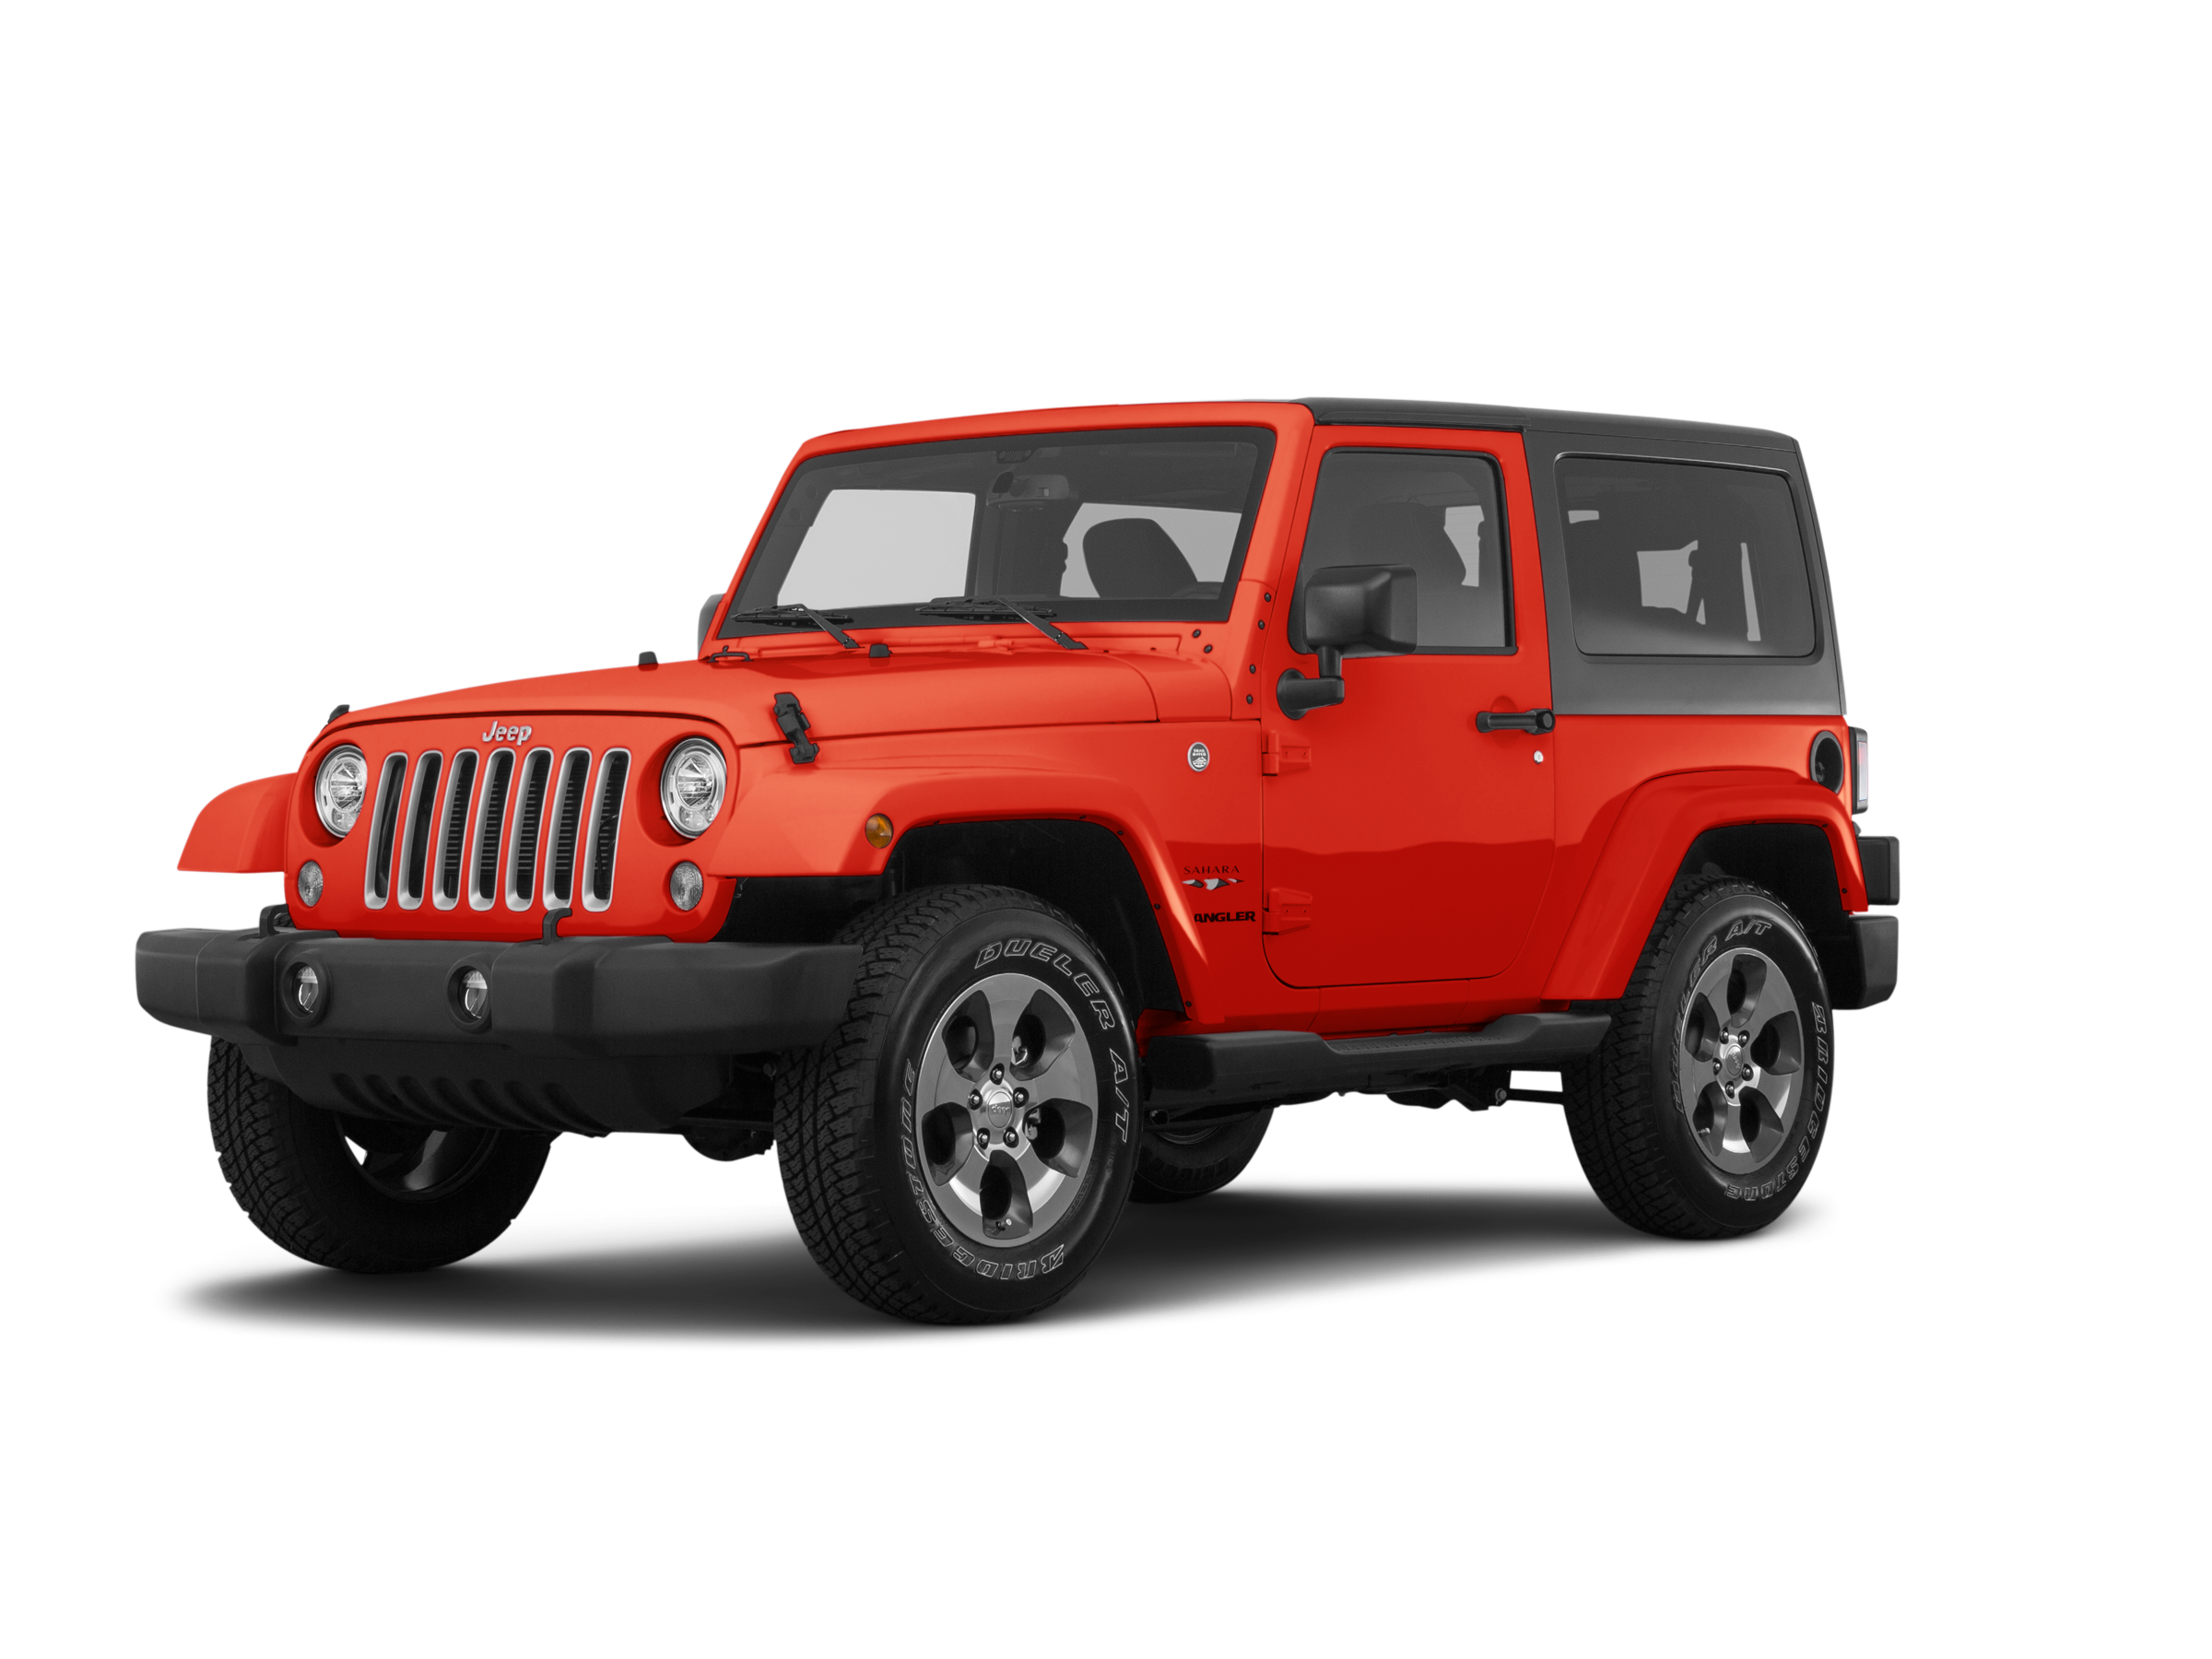 2018 Jeep Wrangler Values & Cars for Sale | Kelley Blue Book